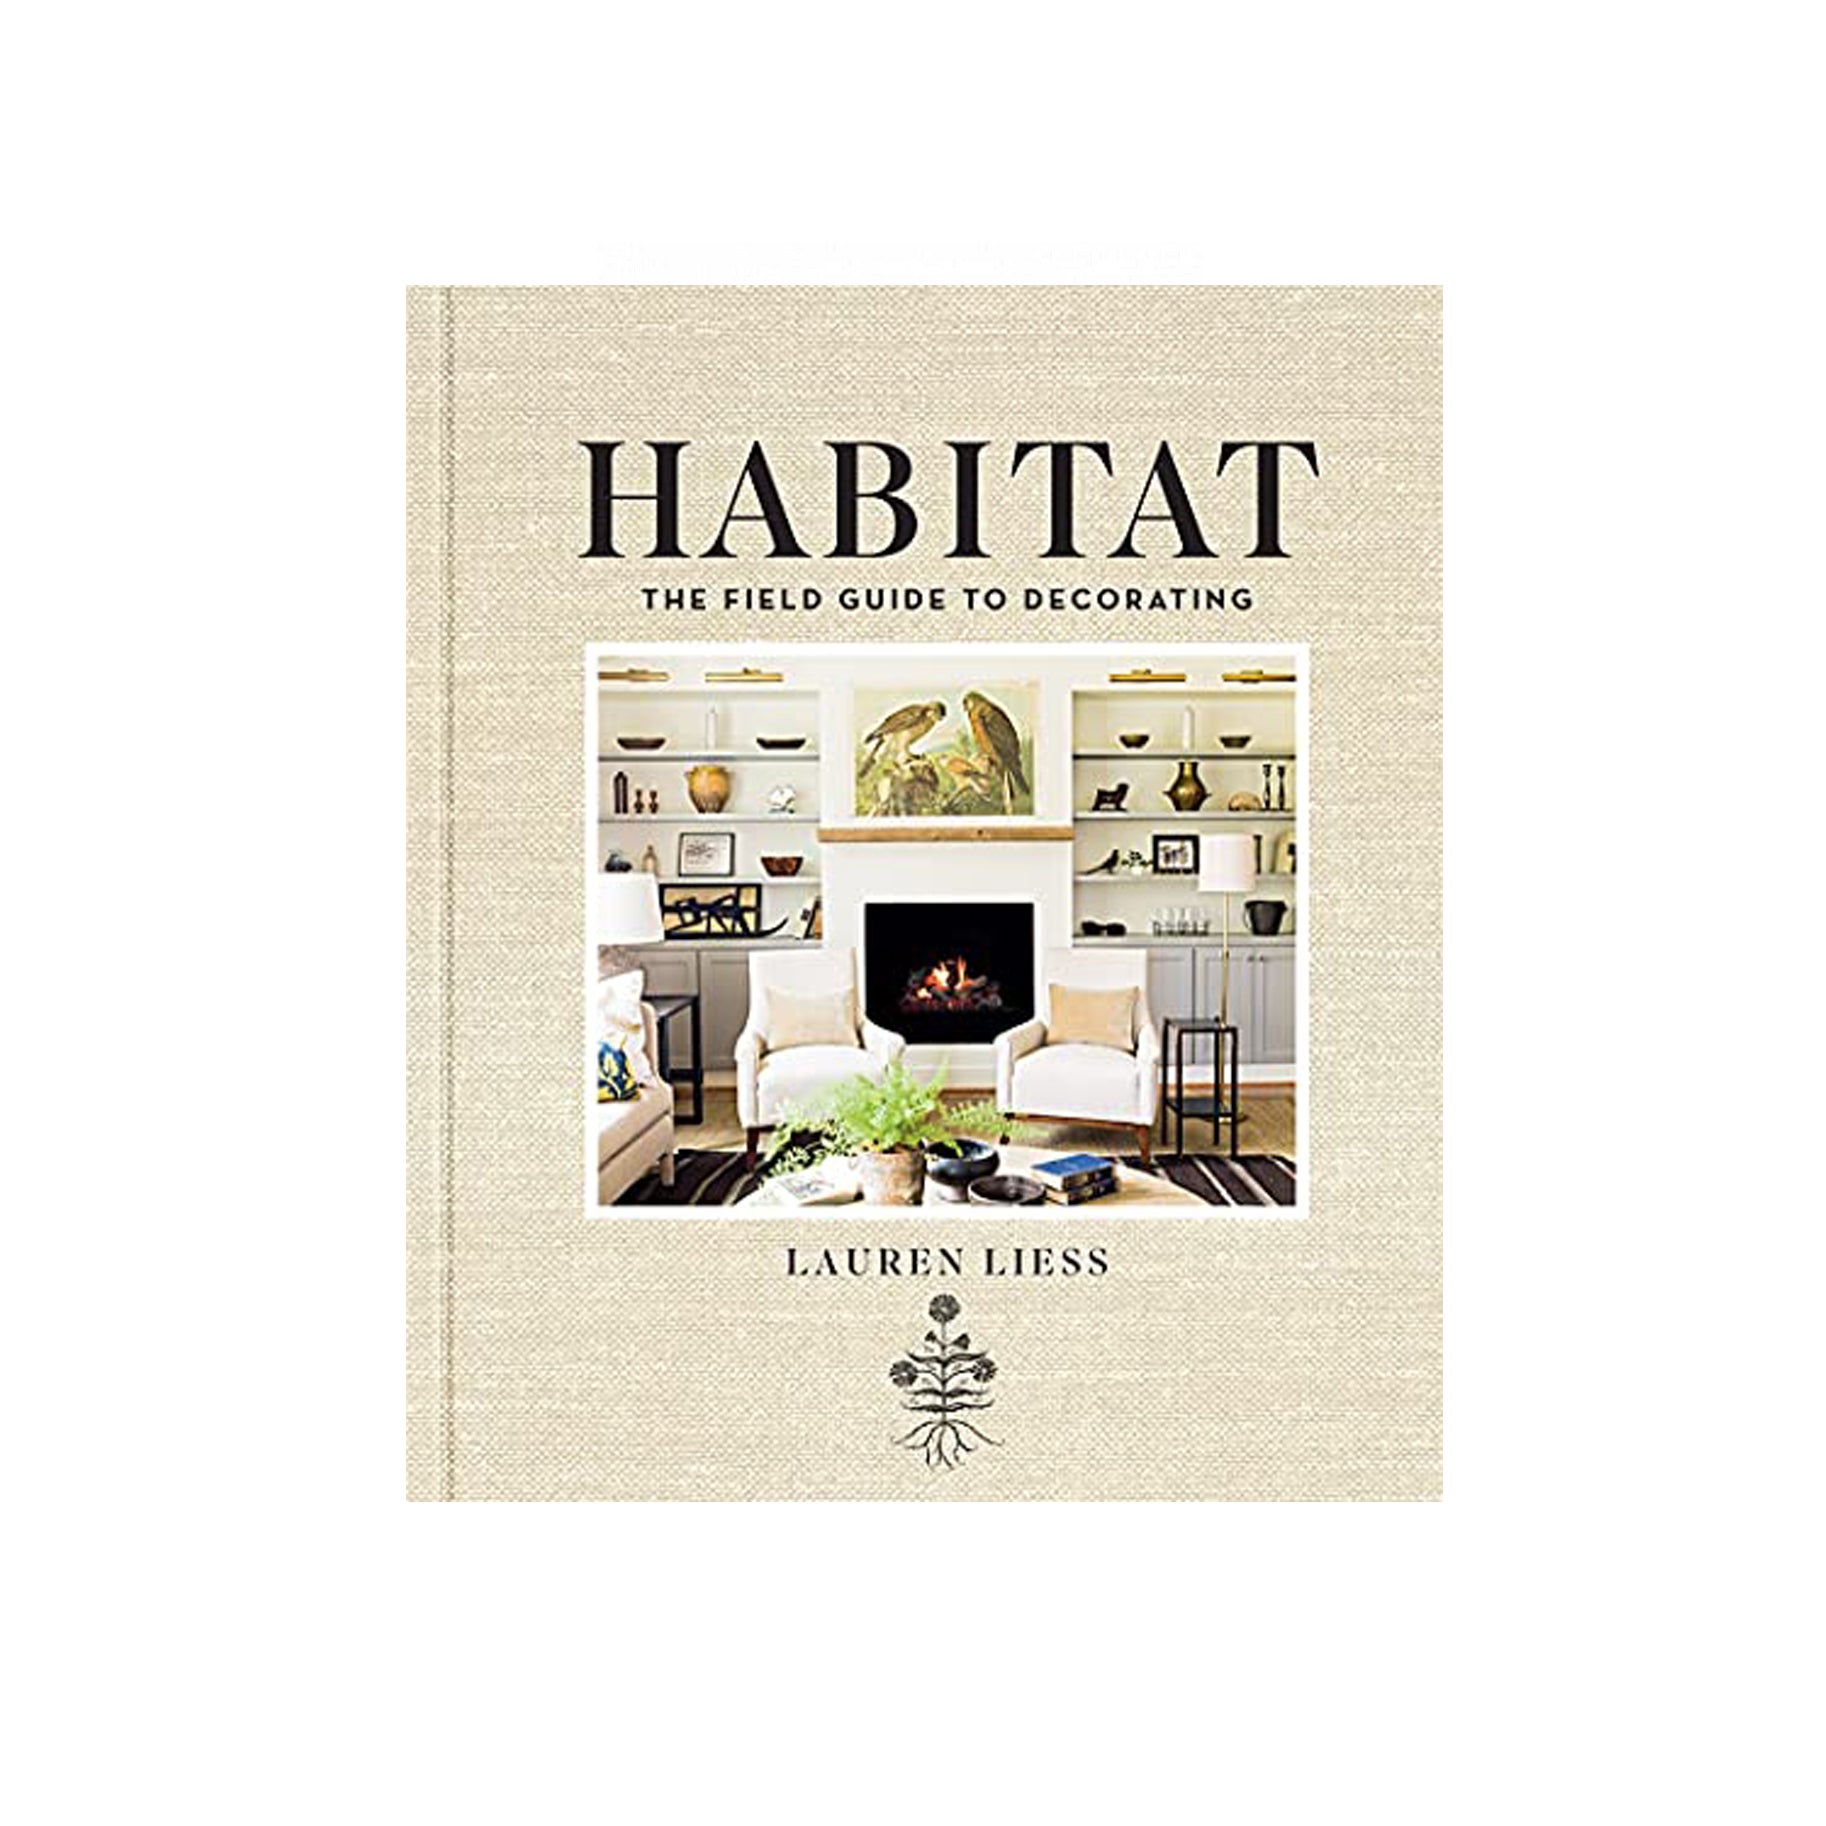 The Best Interior Design Book Option: Habitat The Field Guide to Decorating by Lauren Liess